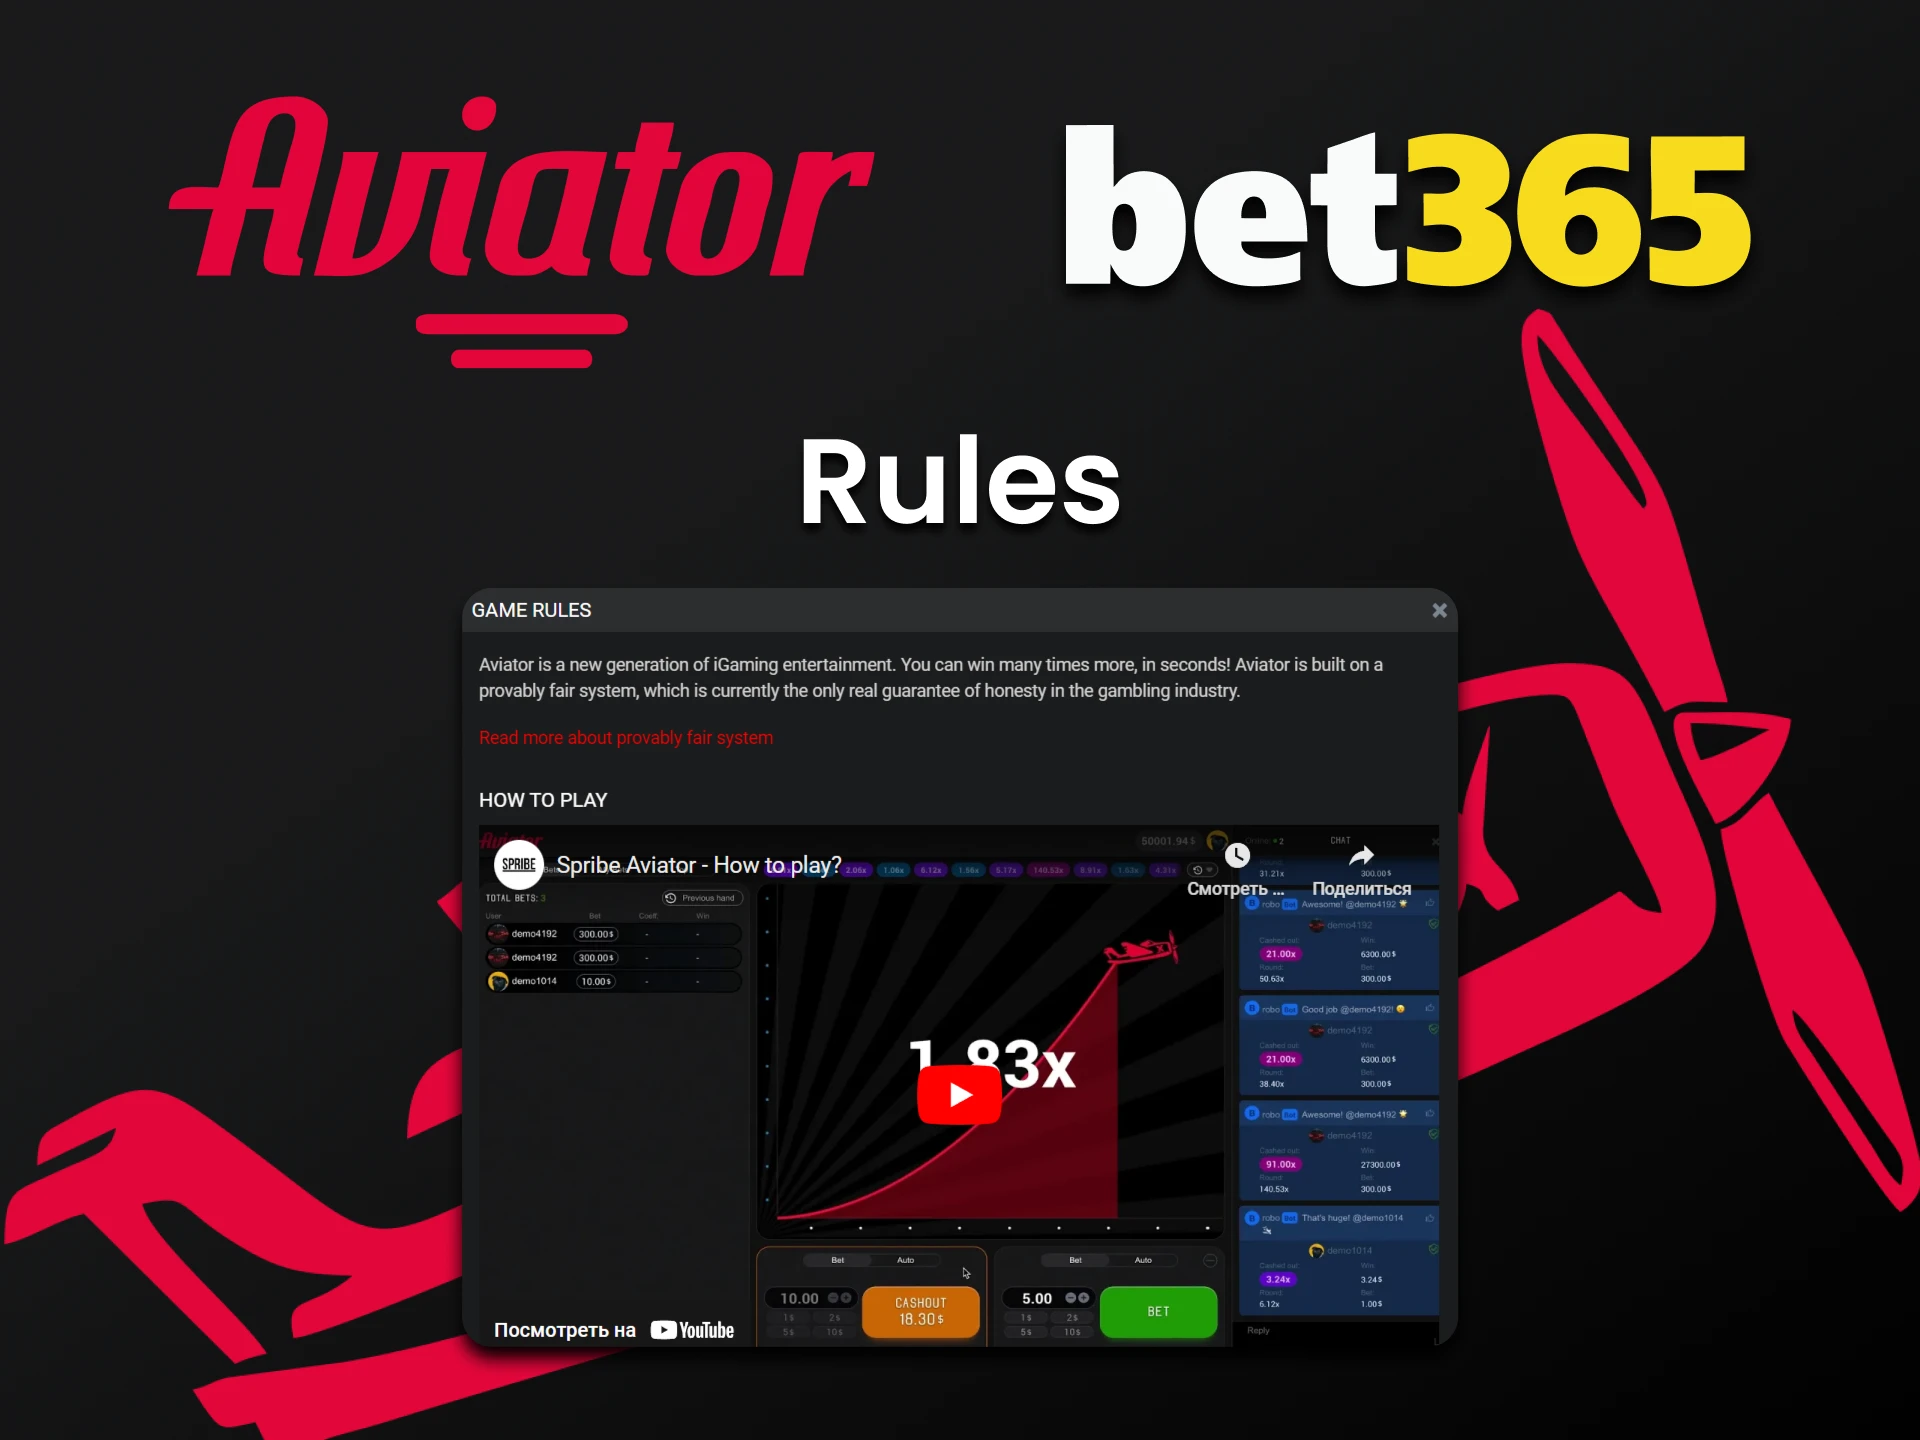 Learn all the rules of the Aviator game on Bet365.